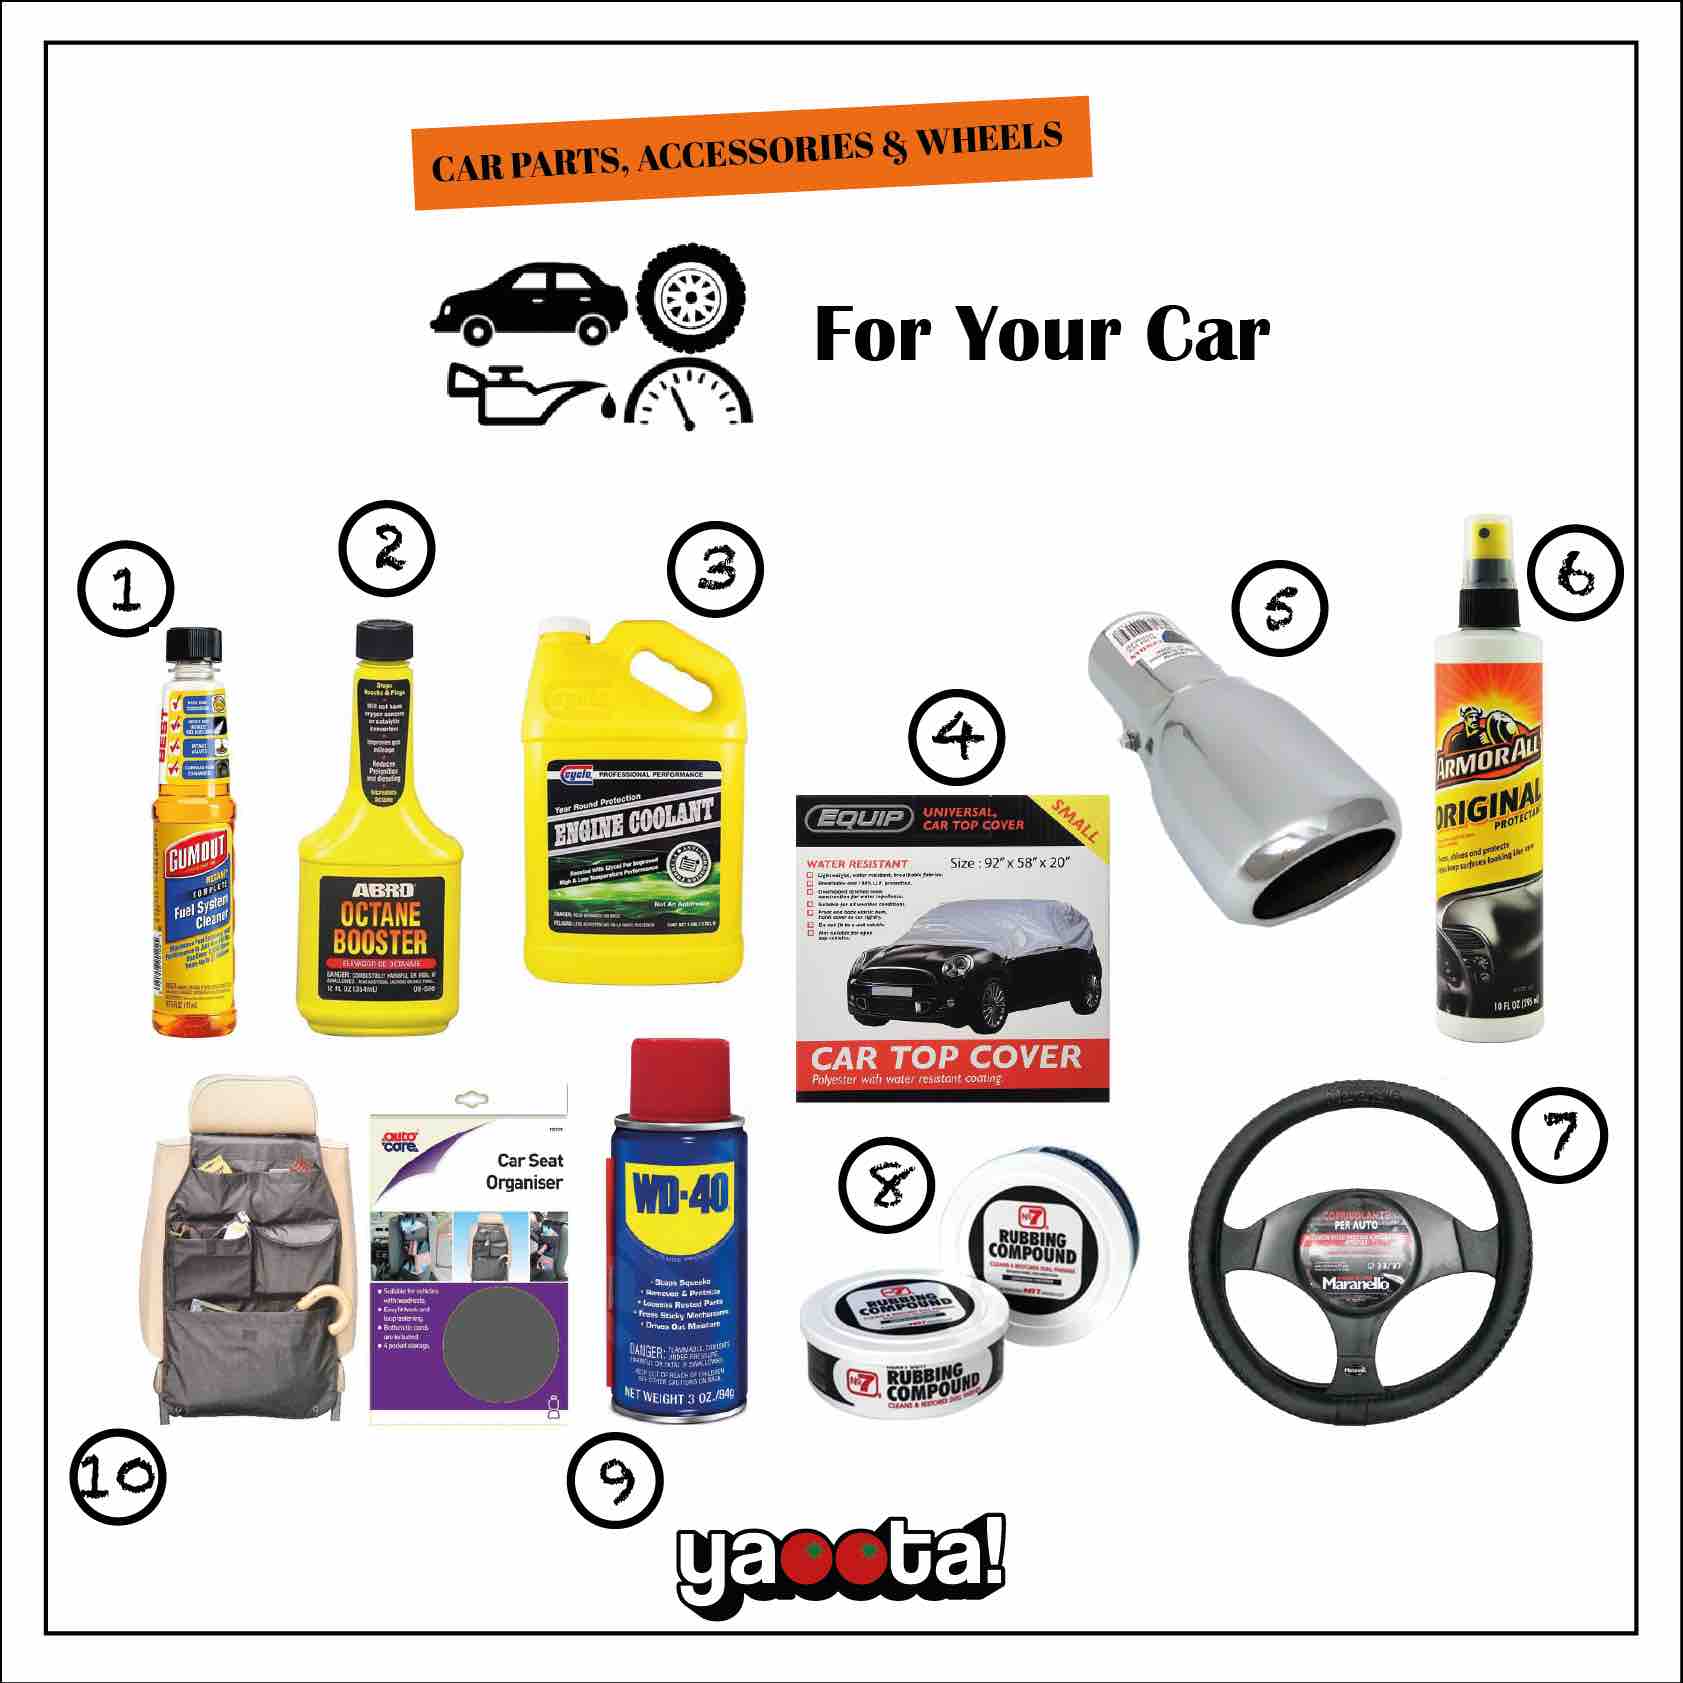 Top 10 Car Care Products and their prices